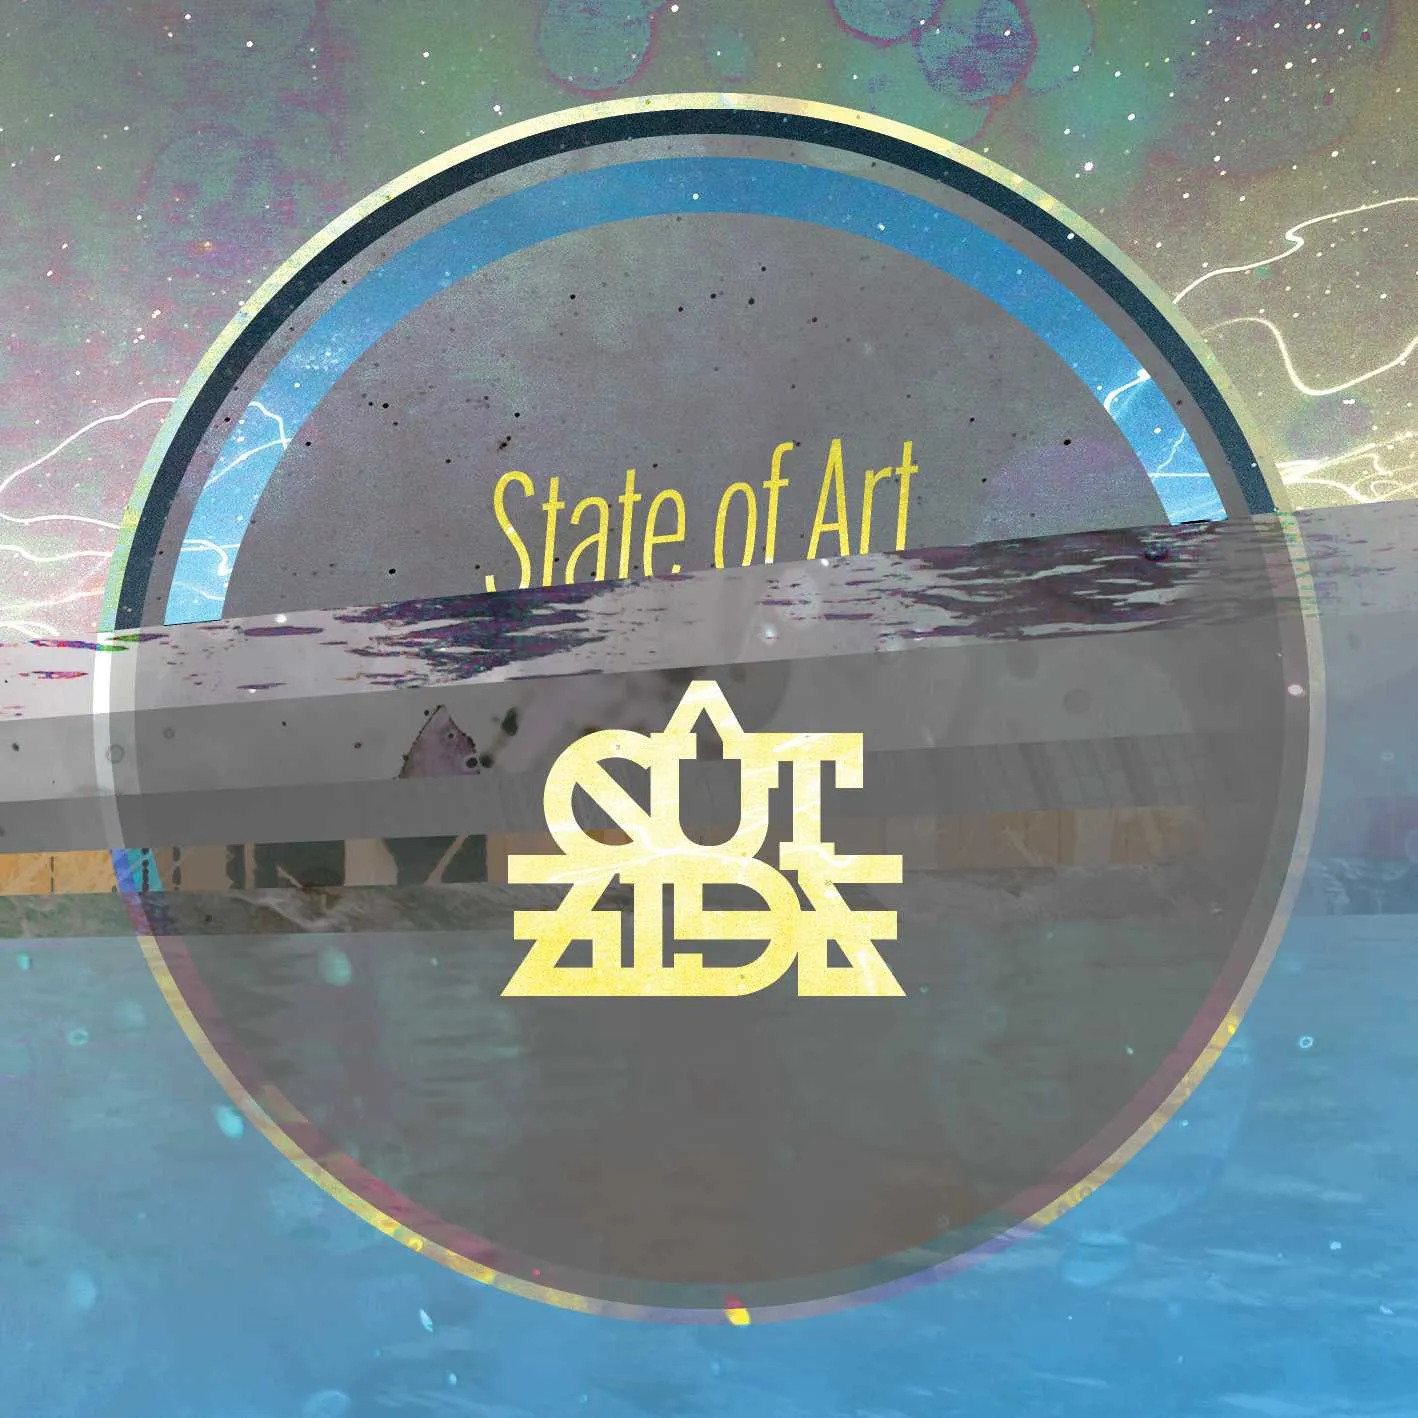 Album cover for “State of Art” by Cutside